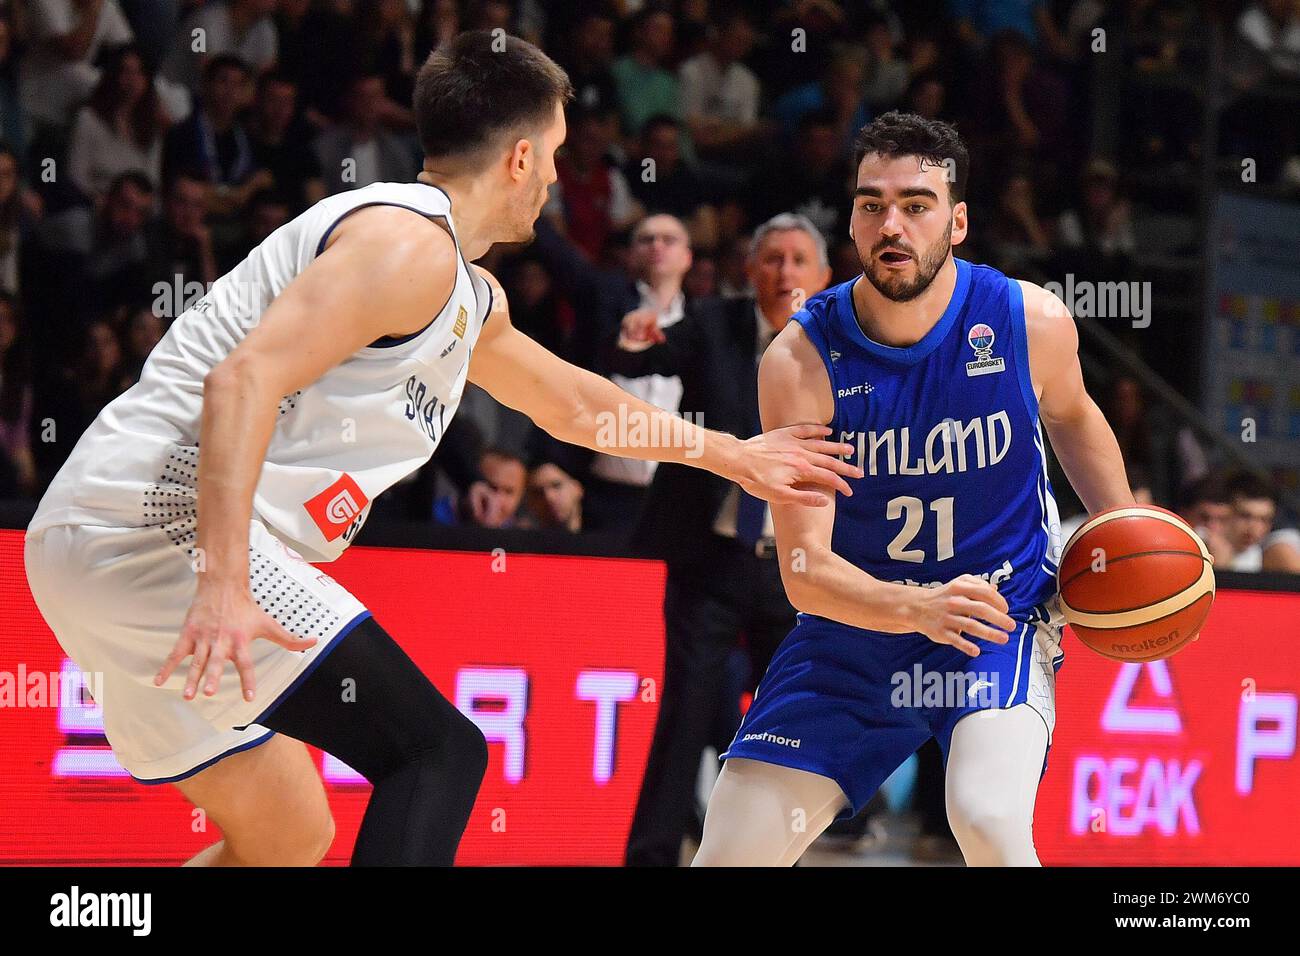 Belgrade, Serbia, 23 February, 2023. Edon Maxhuni of Finland in action during the EuroBasket 2025 Qualifiers match between Serbia and Finland at Aleksandar Nikolic in Belgrade, Serbia. February 23, 2023. Credit: Nikola Krstic/Alamy Stock Photo